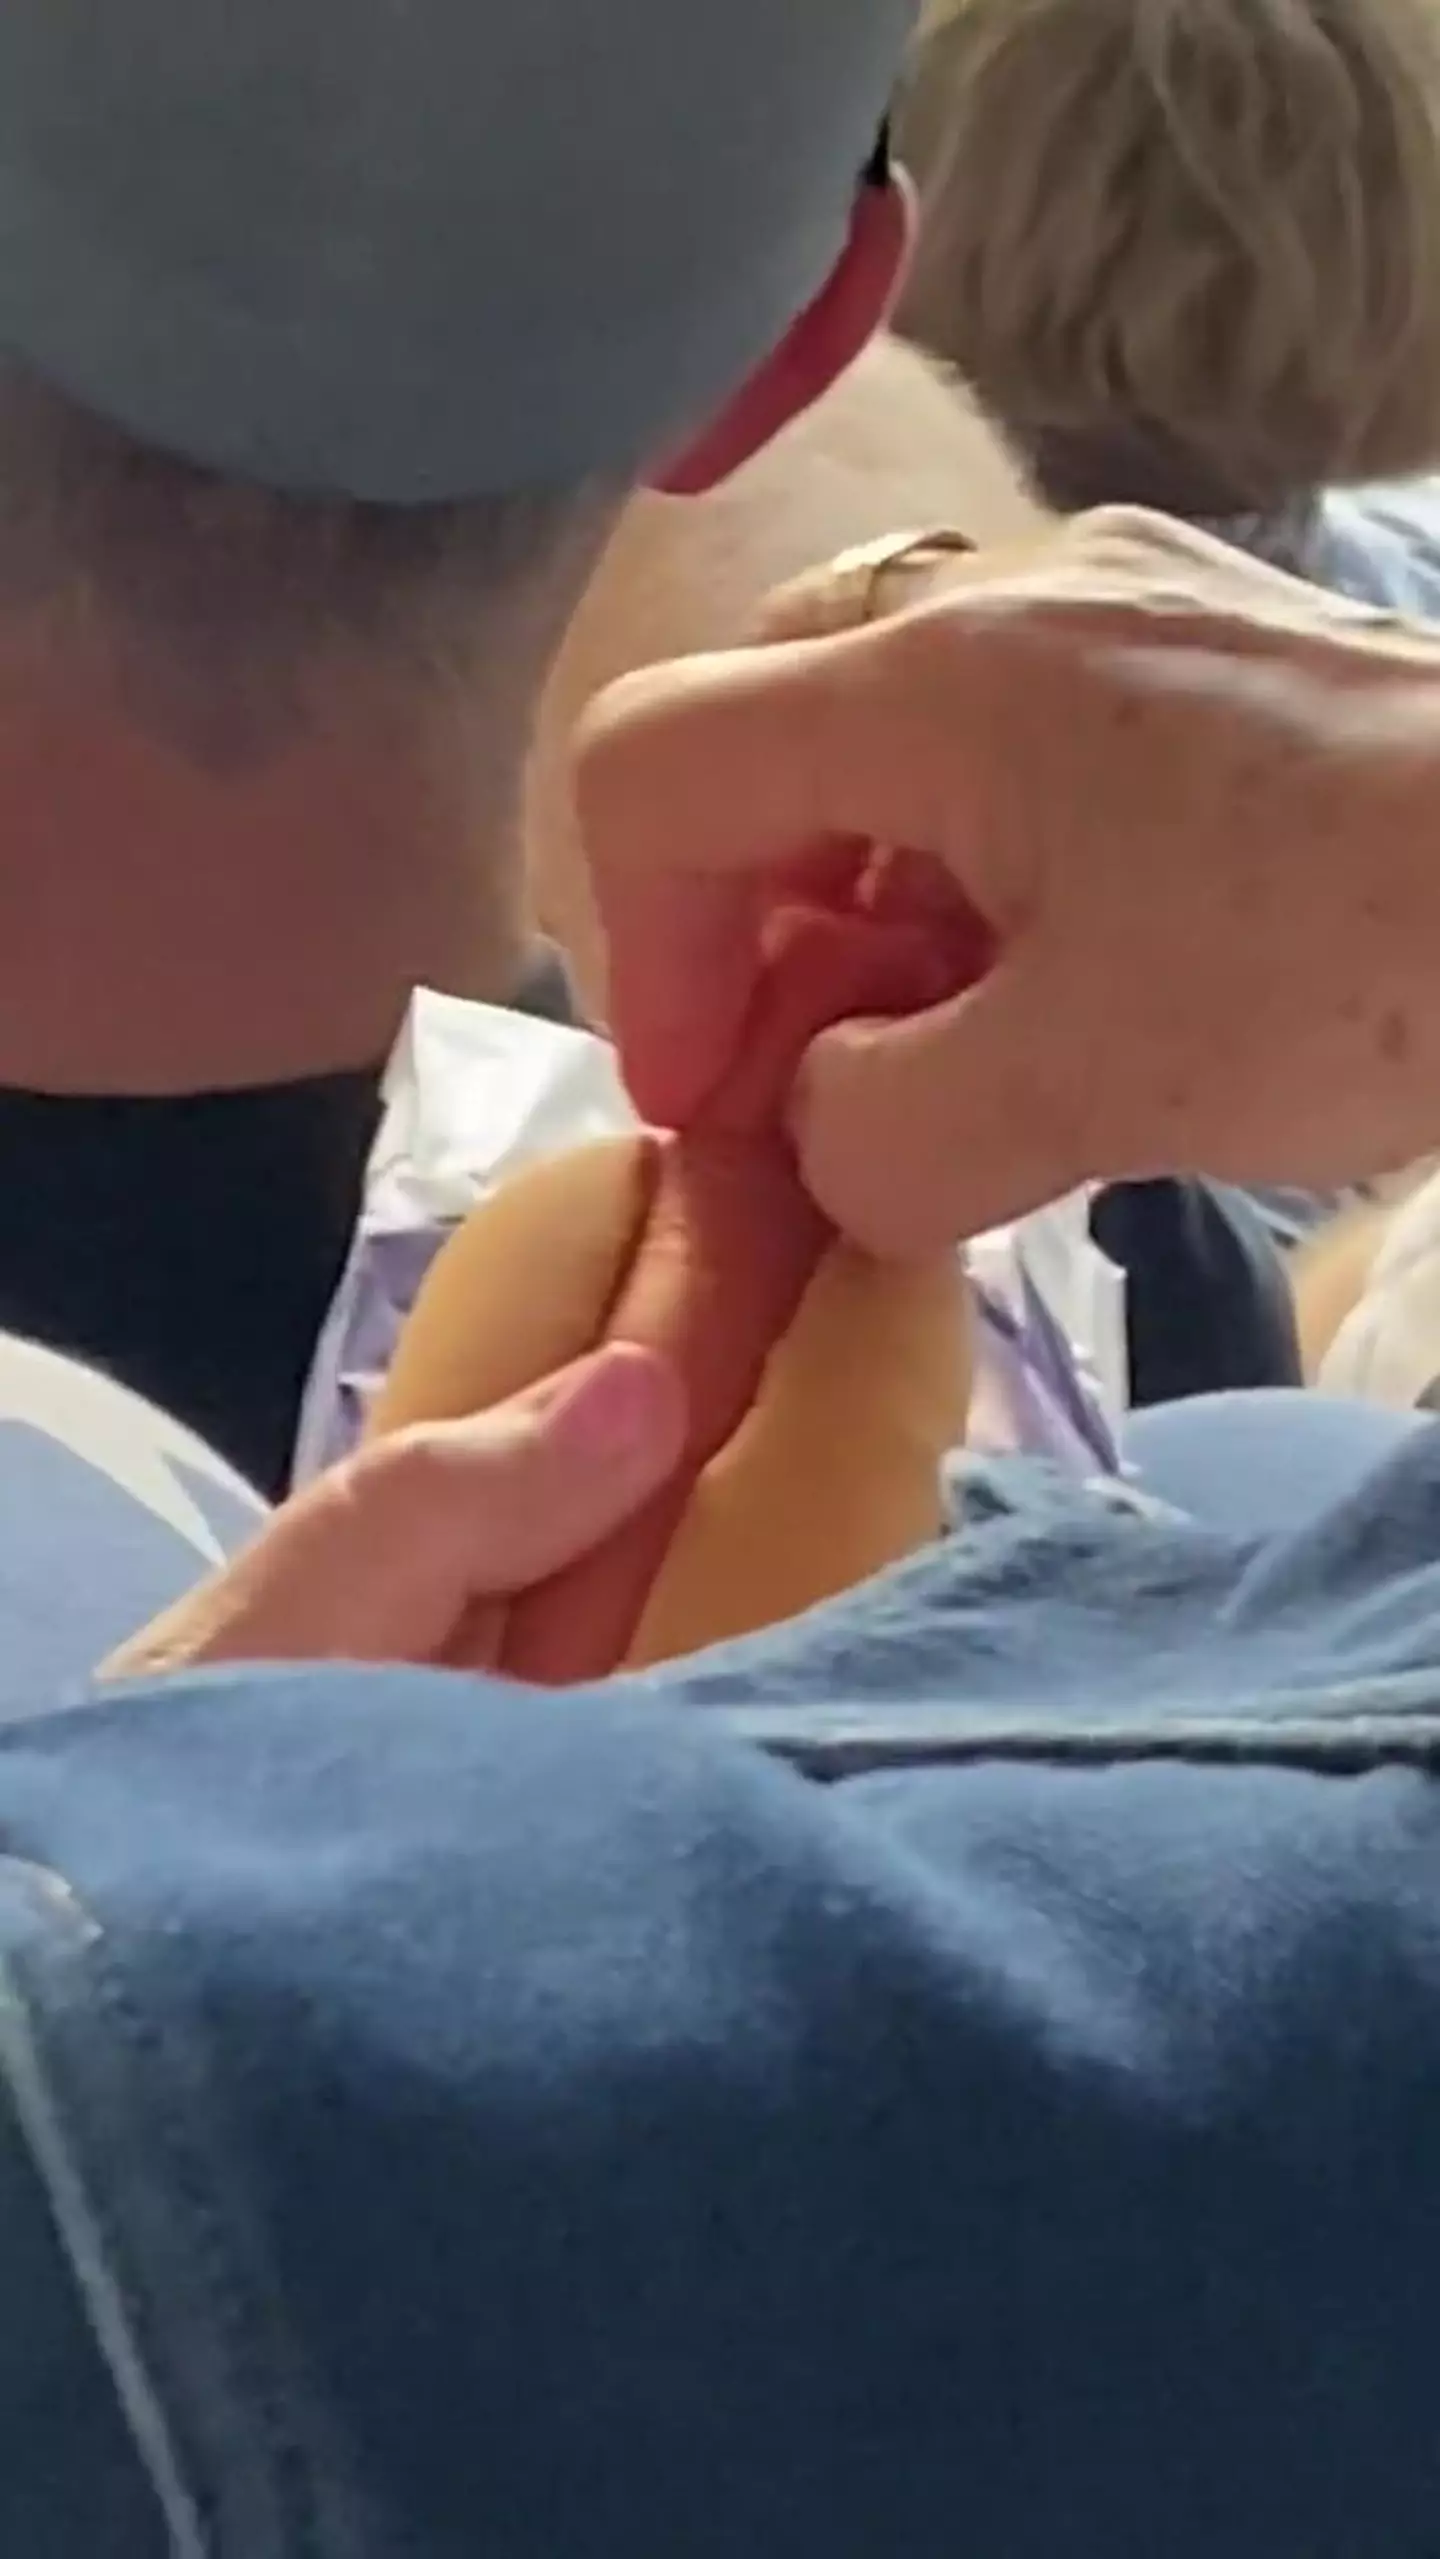 A video of a fan sat in the stands has gone viral after the woman uses a pretty bizarre method of eating a hot dog, which many of us have never witnessed before.